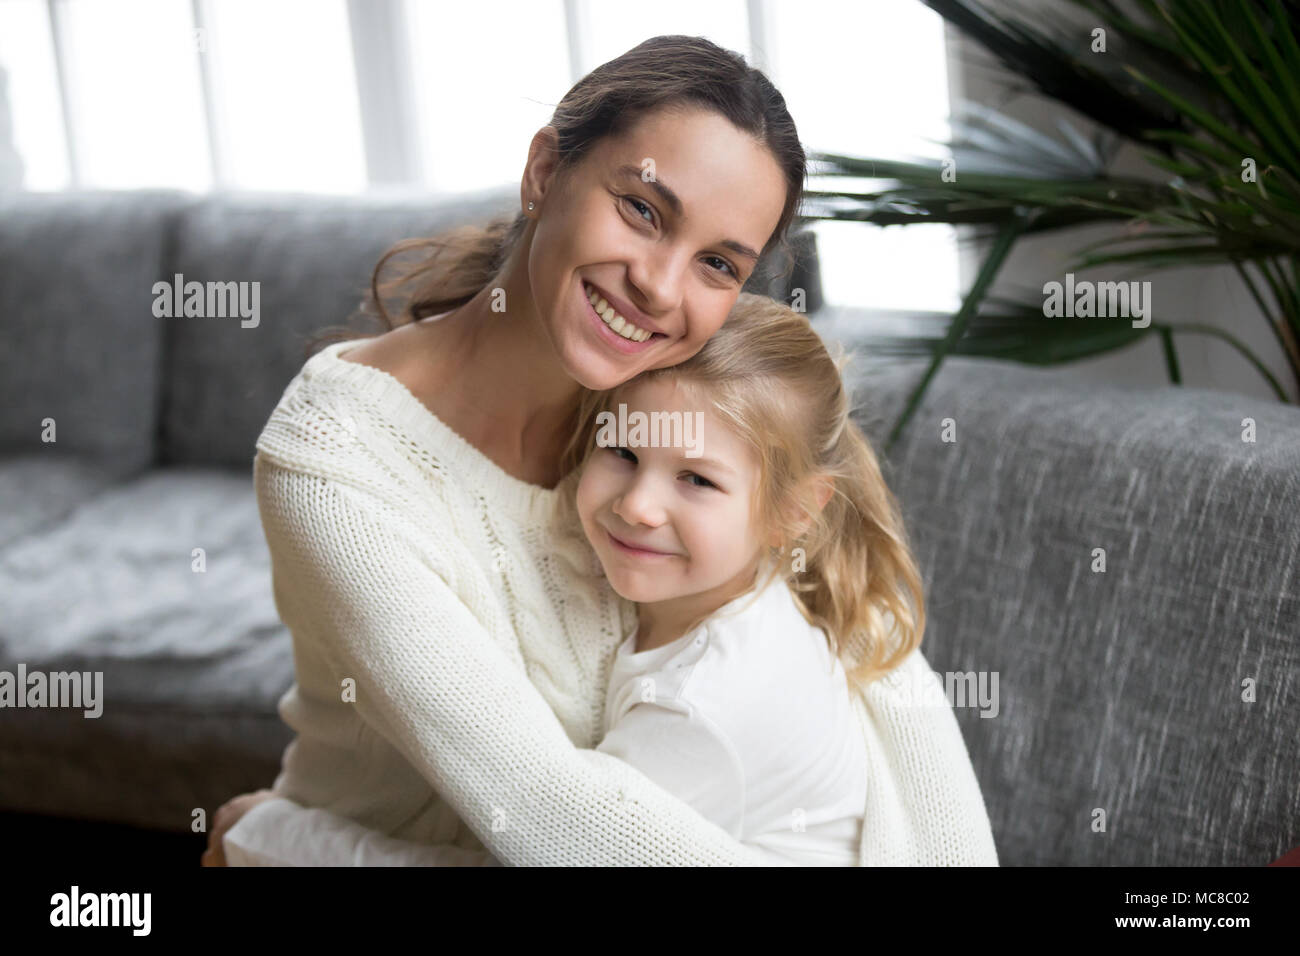 Portrait of happy loving single mother hugging cute little daughter, smiling young woman embracing preschool kid girl, diverse mom and adopted child l Stock Photo